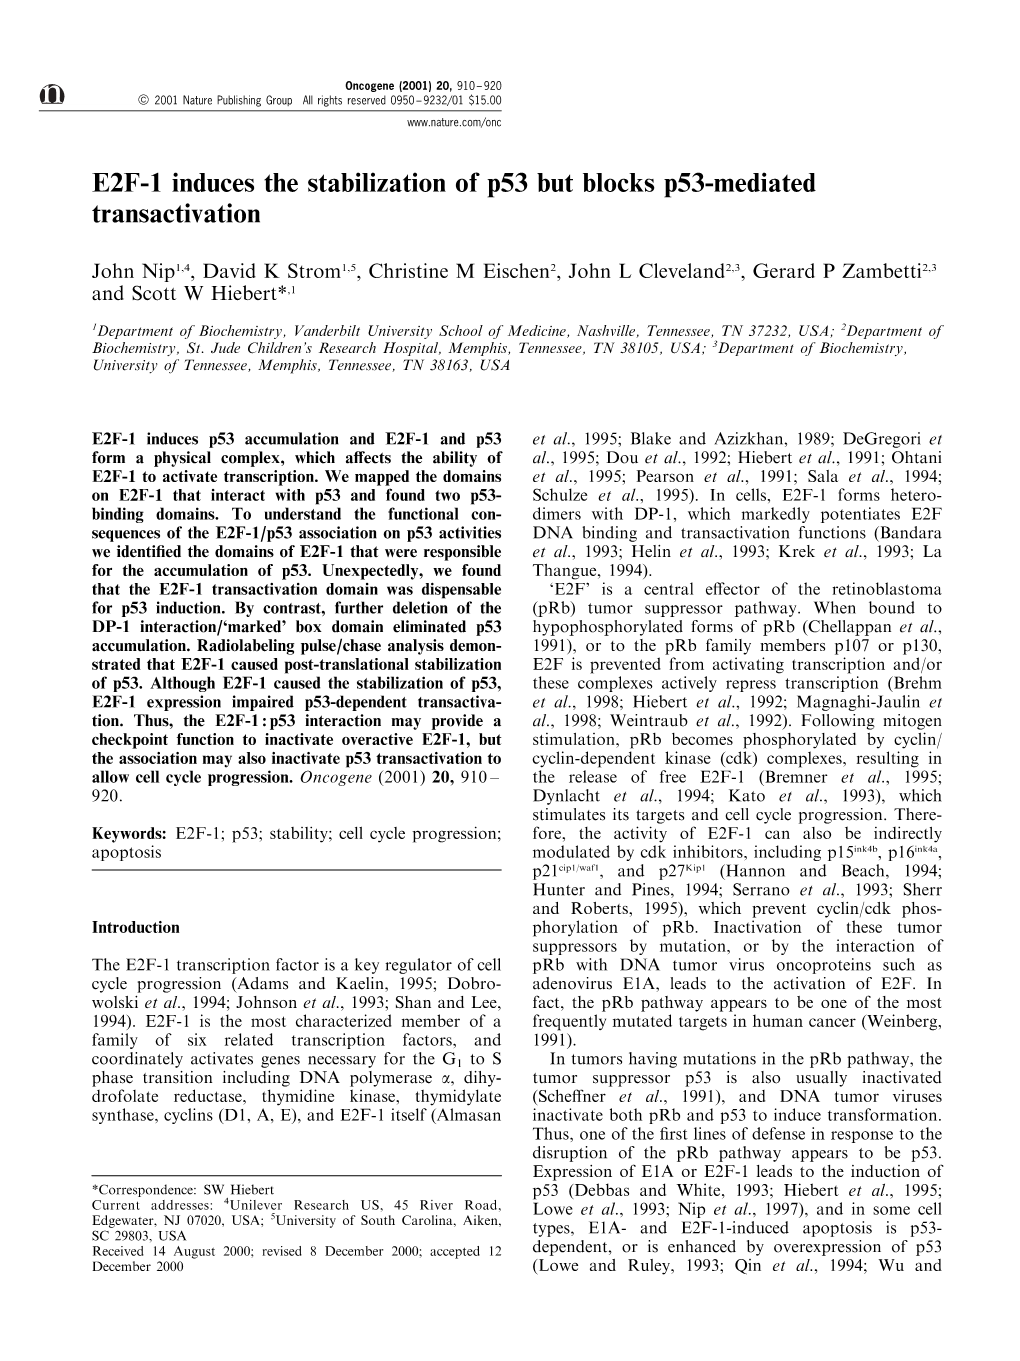 E2F-1 Induces the Stabilization of P53 but Blocks P53-Mediated Transactivation